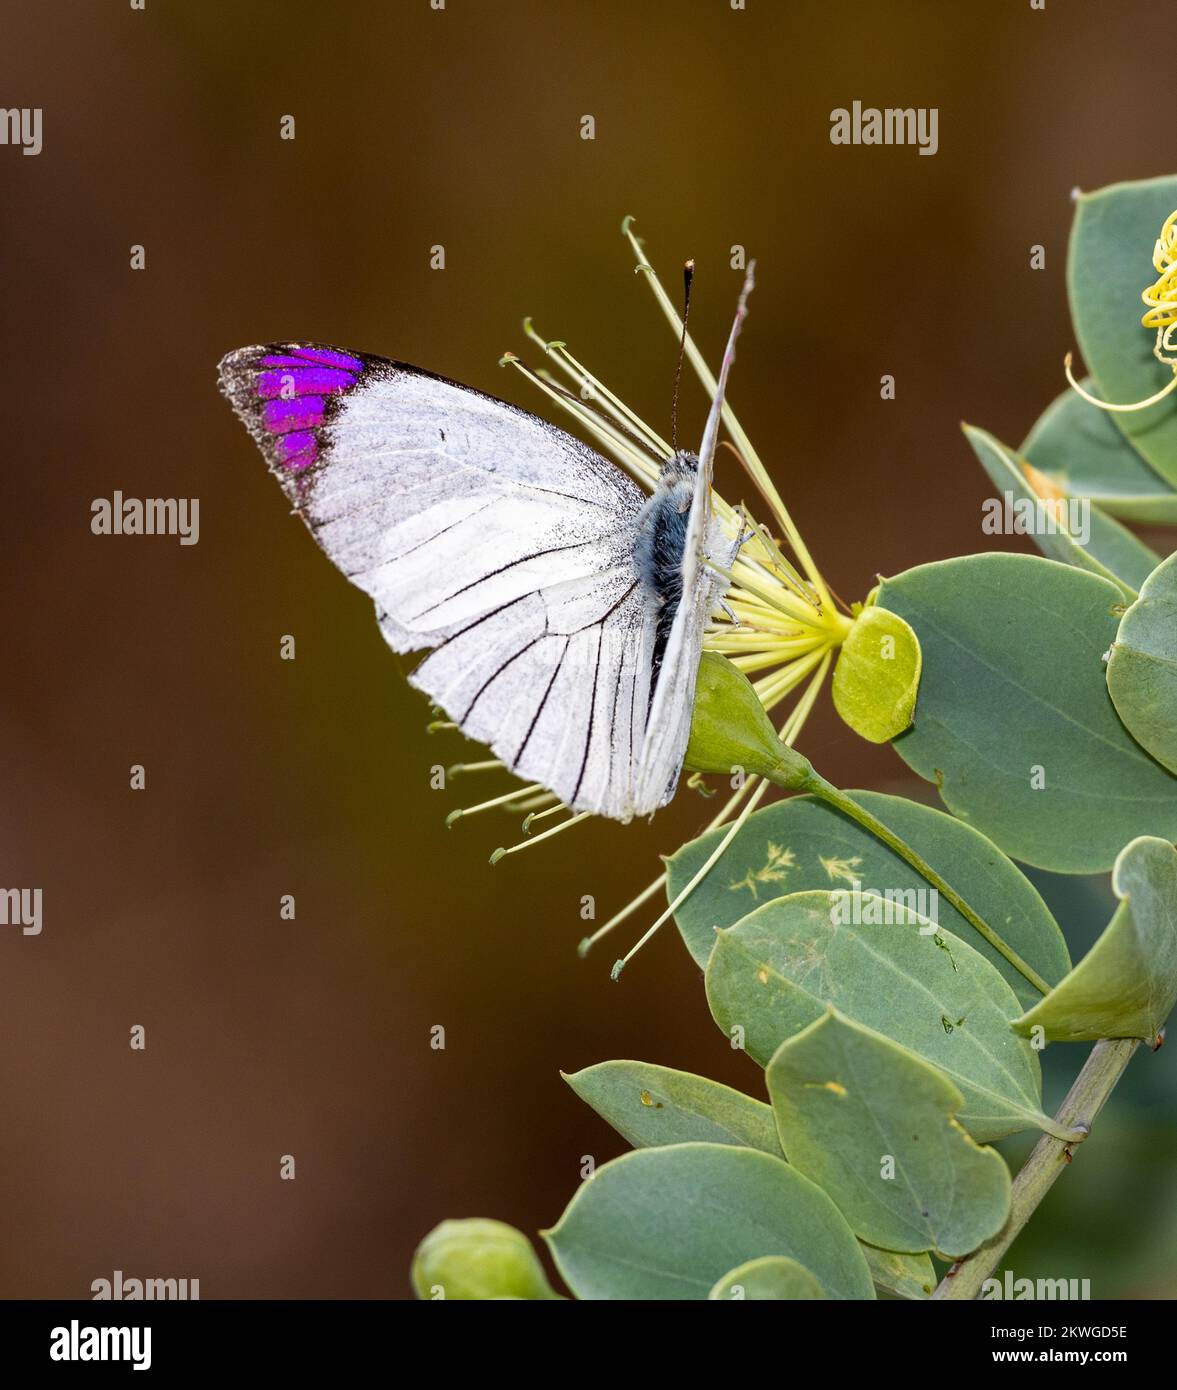 The iridescent wing tips of the Purple Tip butterfly is distinctive. They are a common butterfly of grasslands and open savanna in East Africa. Stock Photo